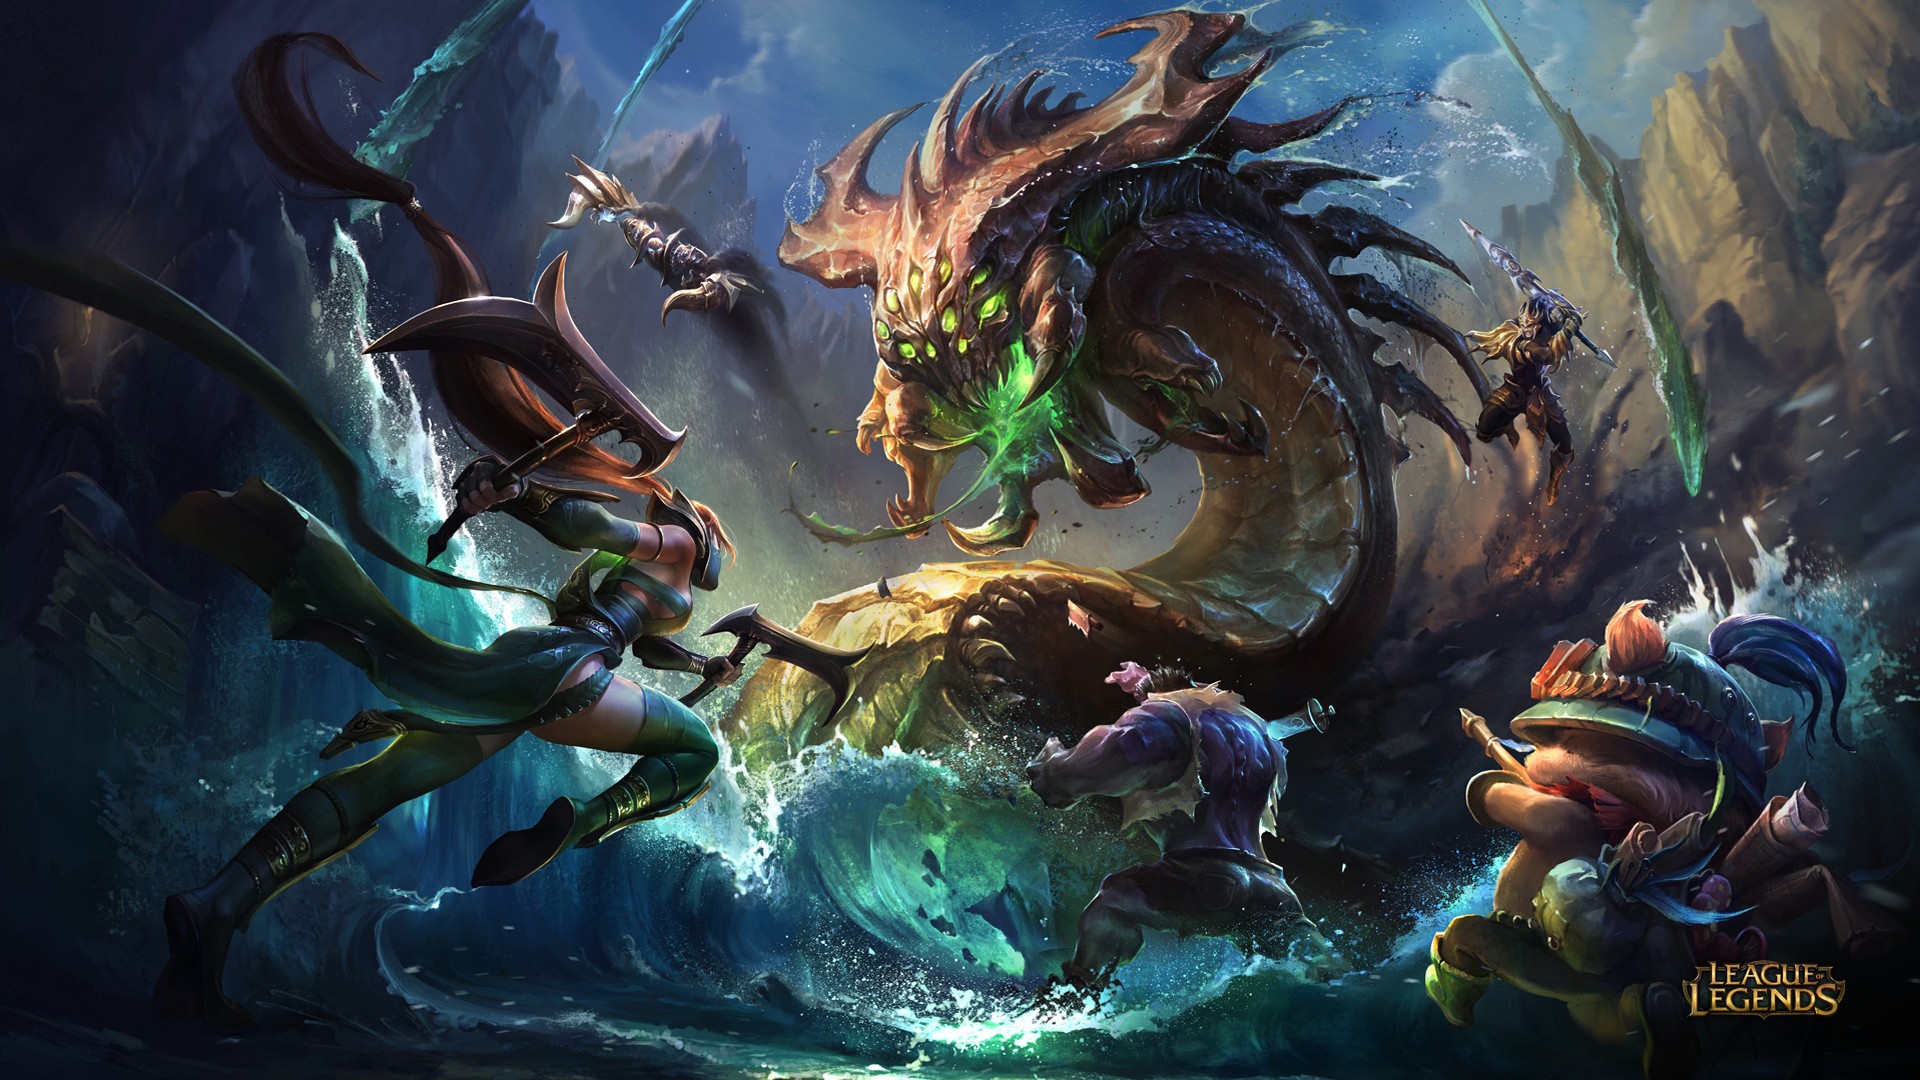 General 1920x1080 League of Legends Teemo Baron Nashor video games fantasy art video game art video game characters moba Akali (League of Legends) Nocturne Jarvan IV Dr. Mundo PC gaming creature battle